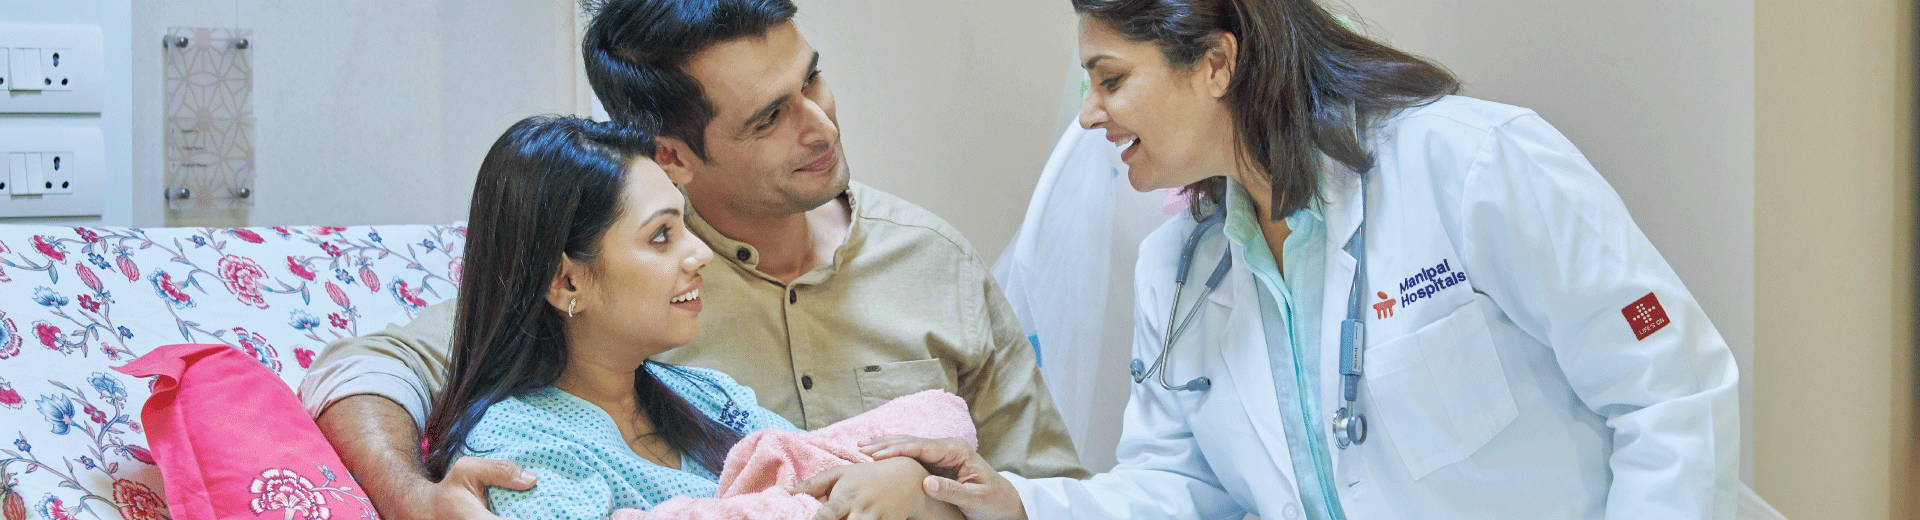 Endoscopy During Pregnancy | Manipal Hospitals India